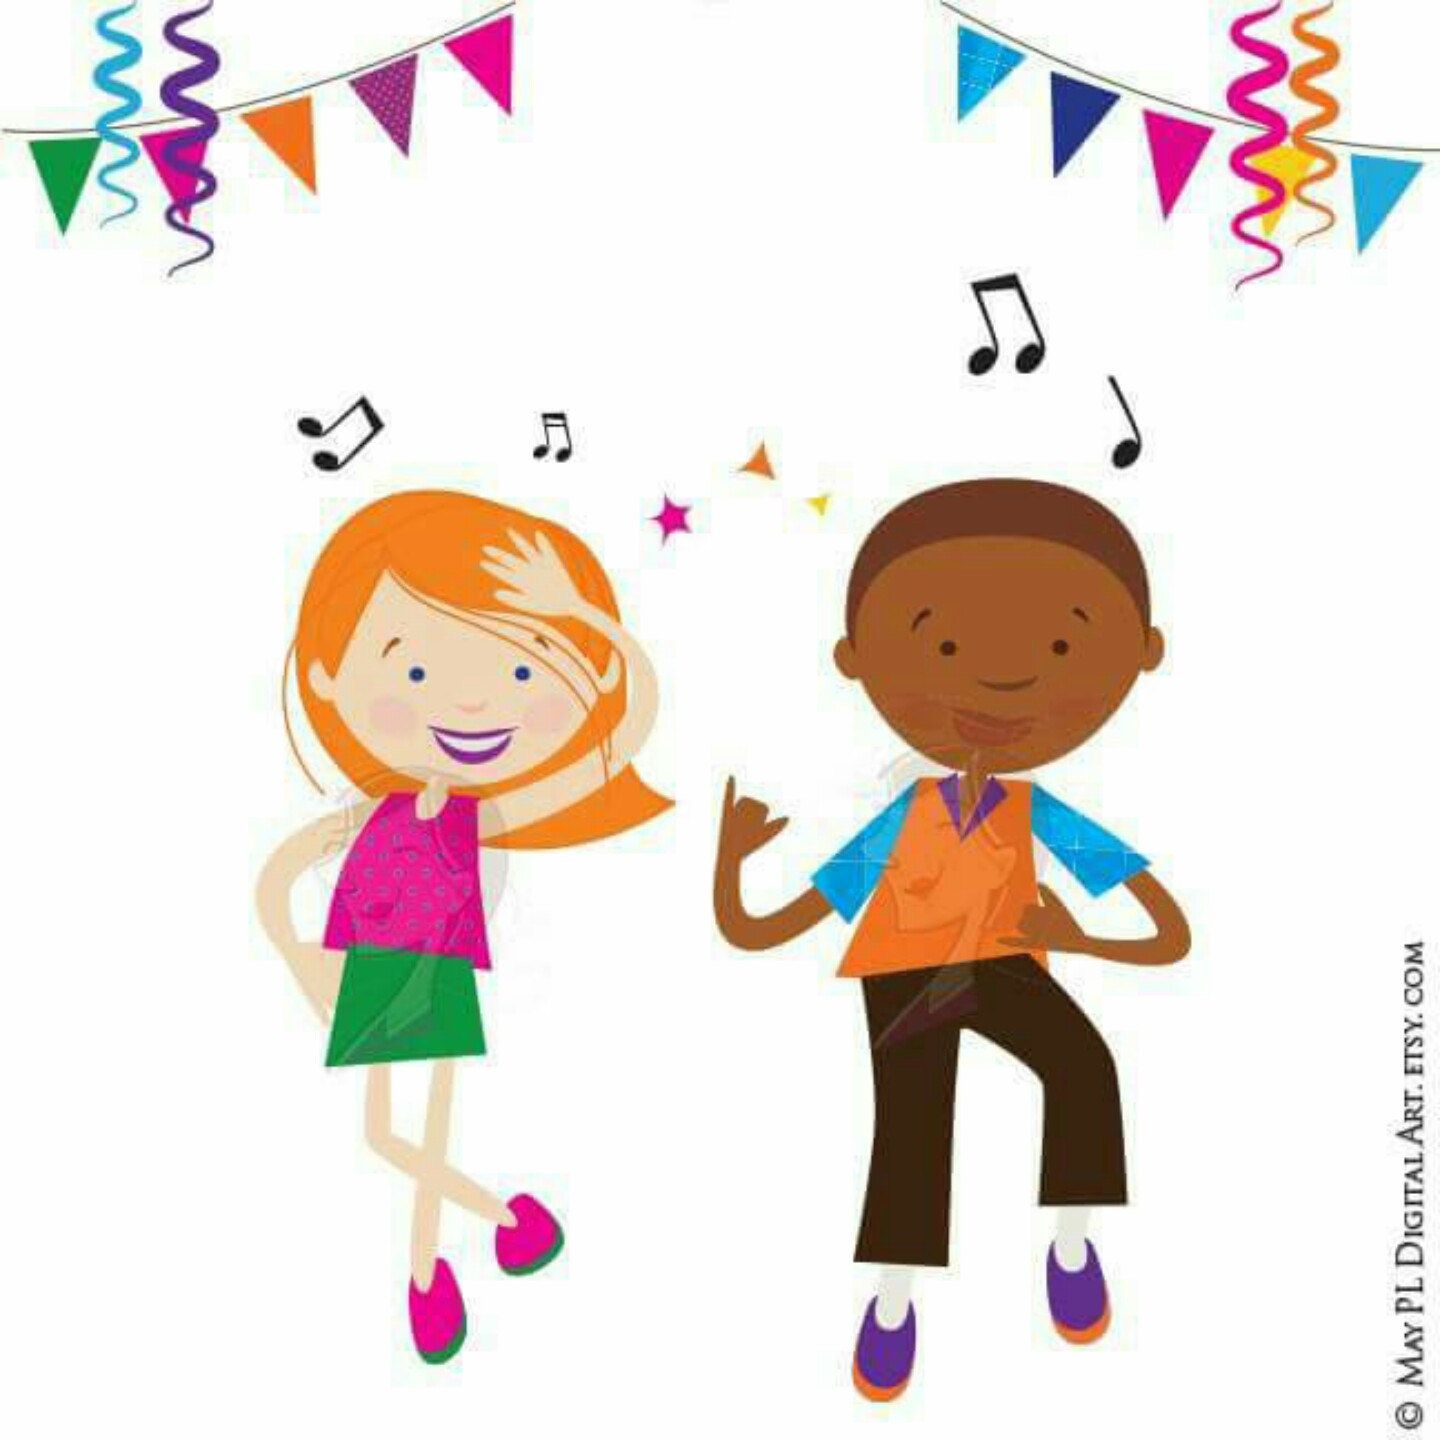 dance party clipart - Clip Art Library - Clip Art Library